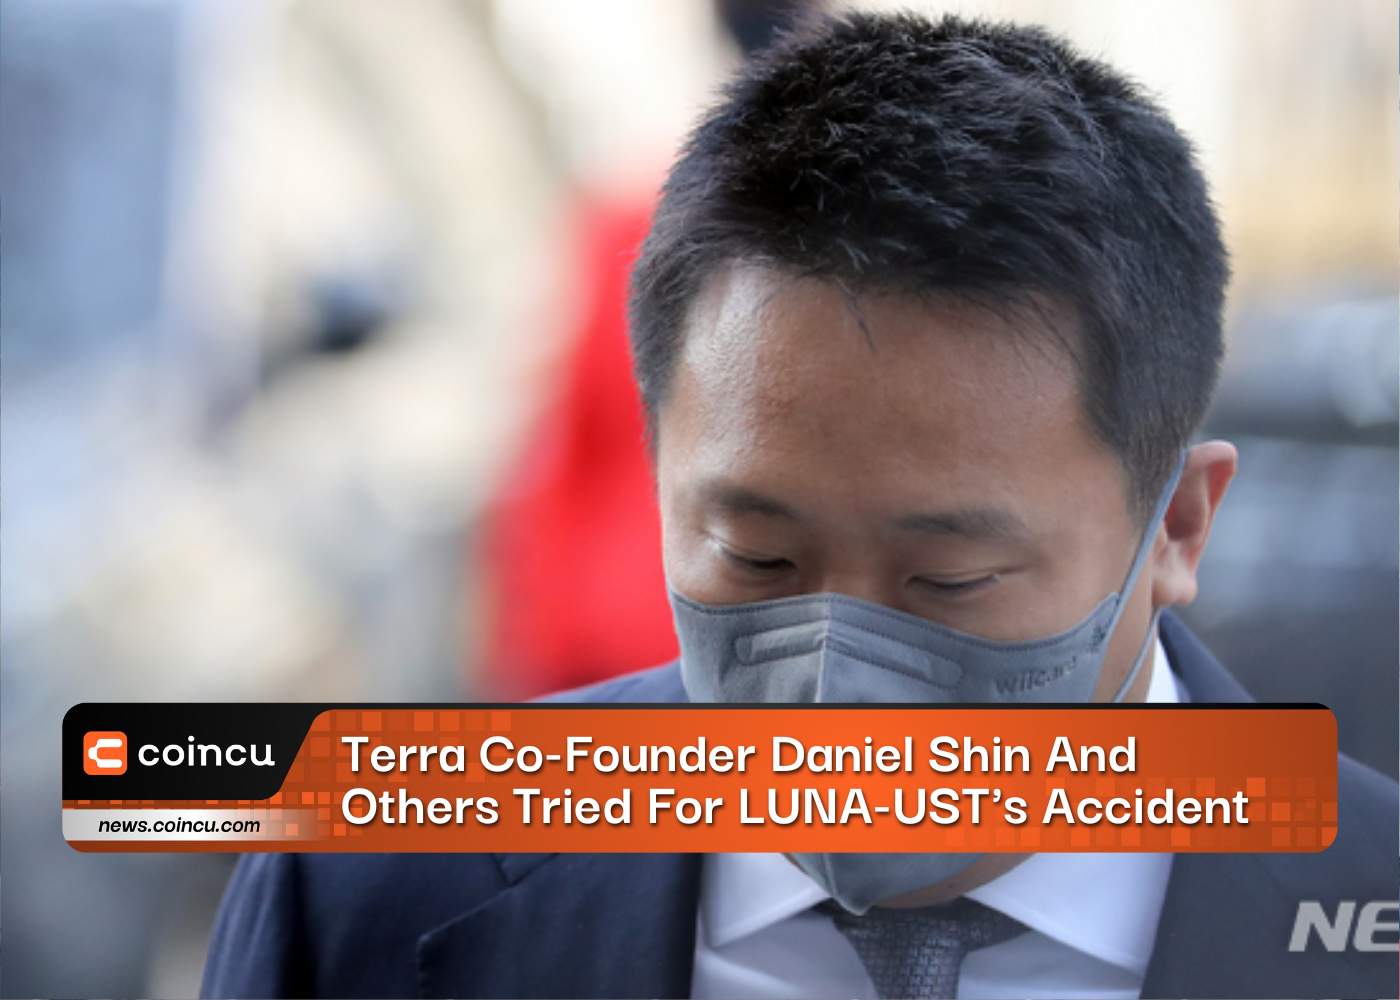 Terra Co-Founder Daniel Shin And Others Tried For LUNA-UST's Accident